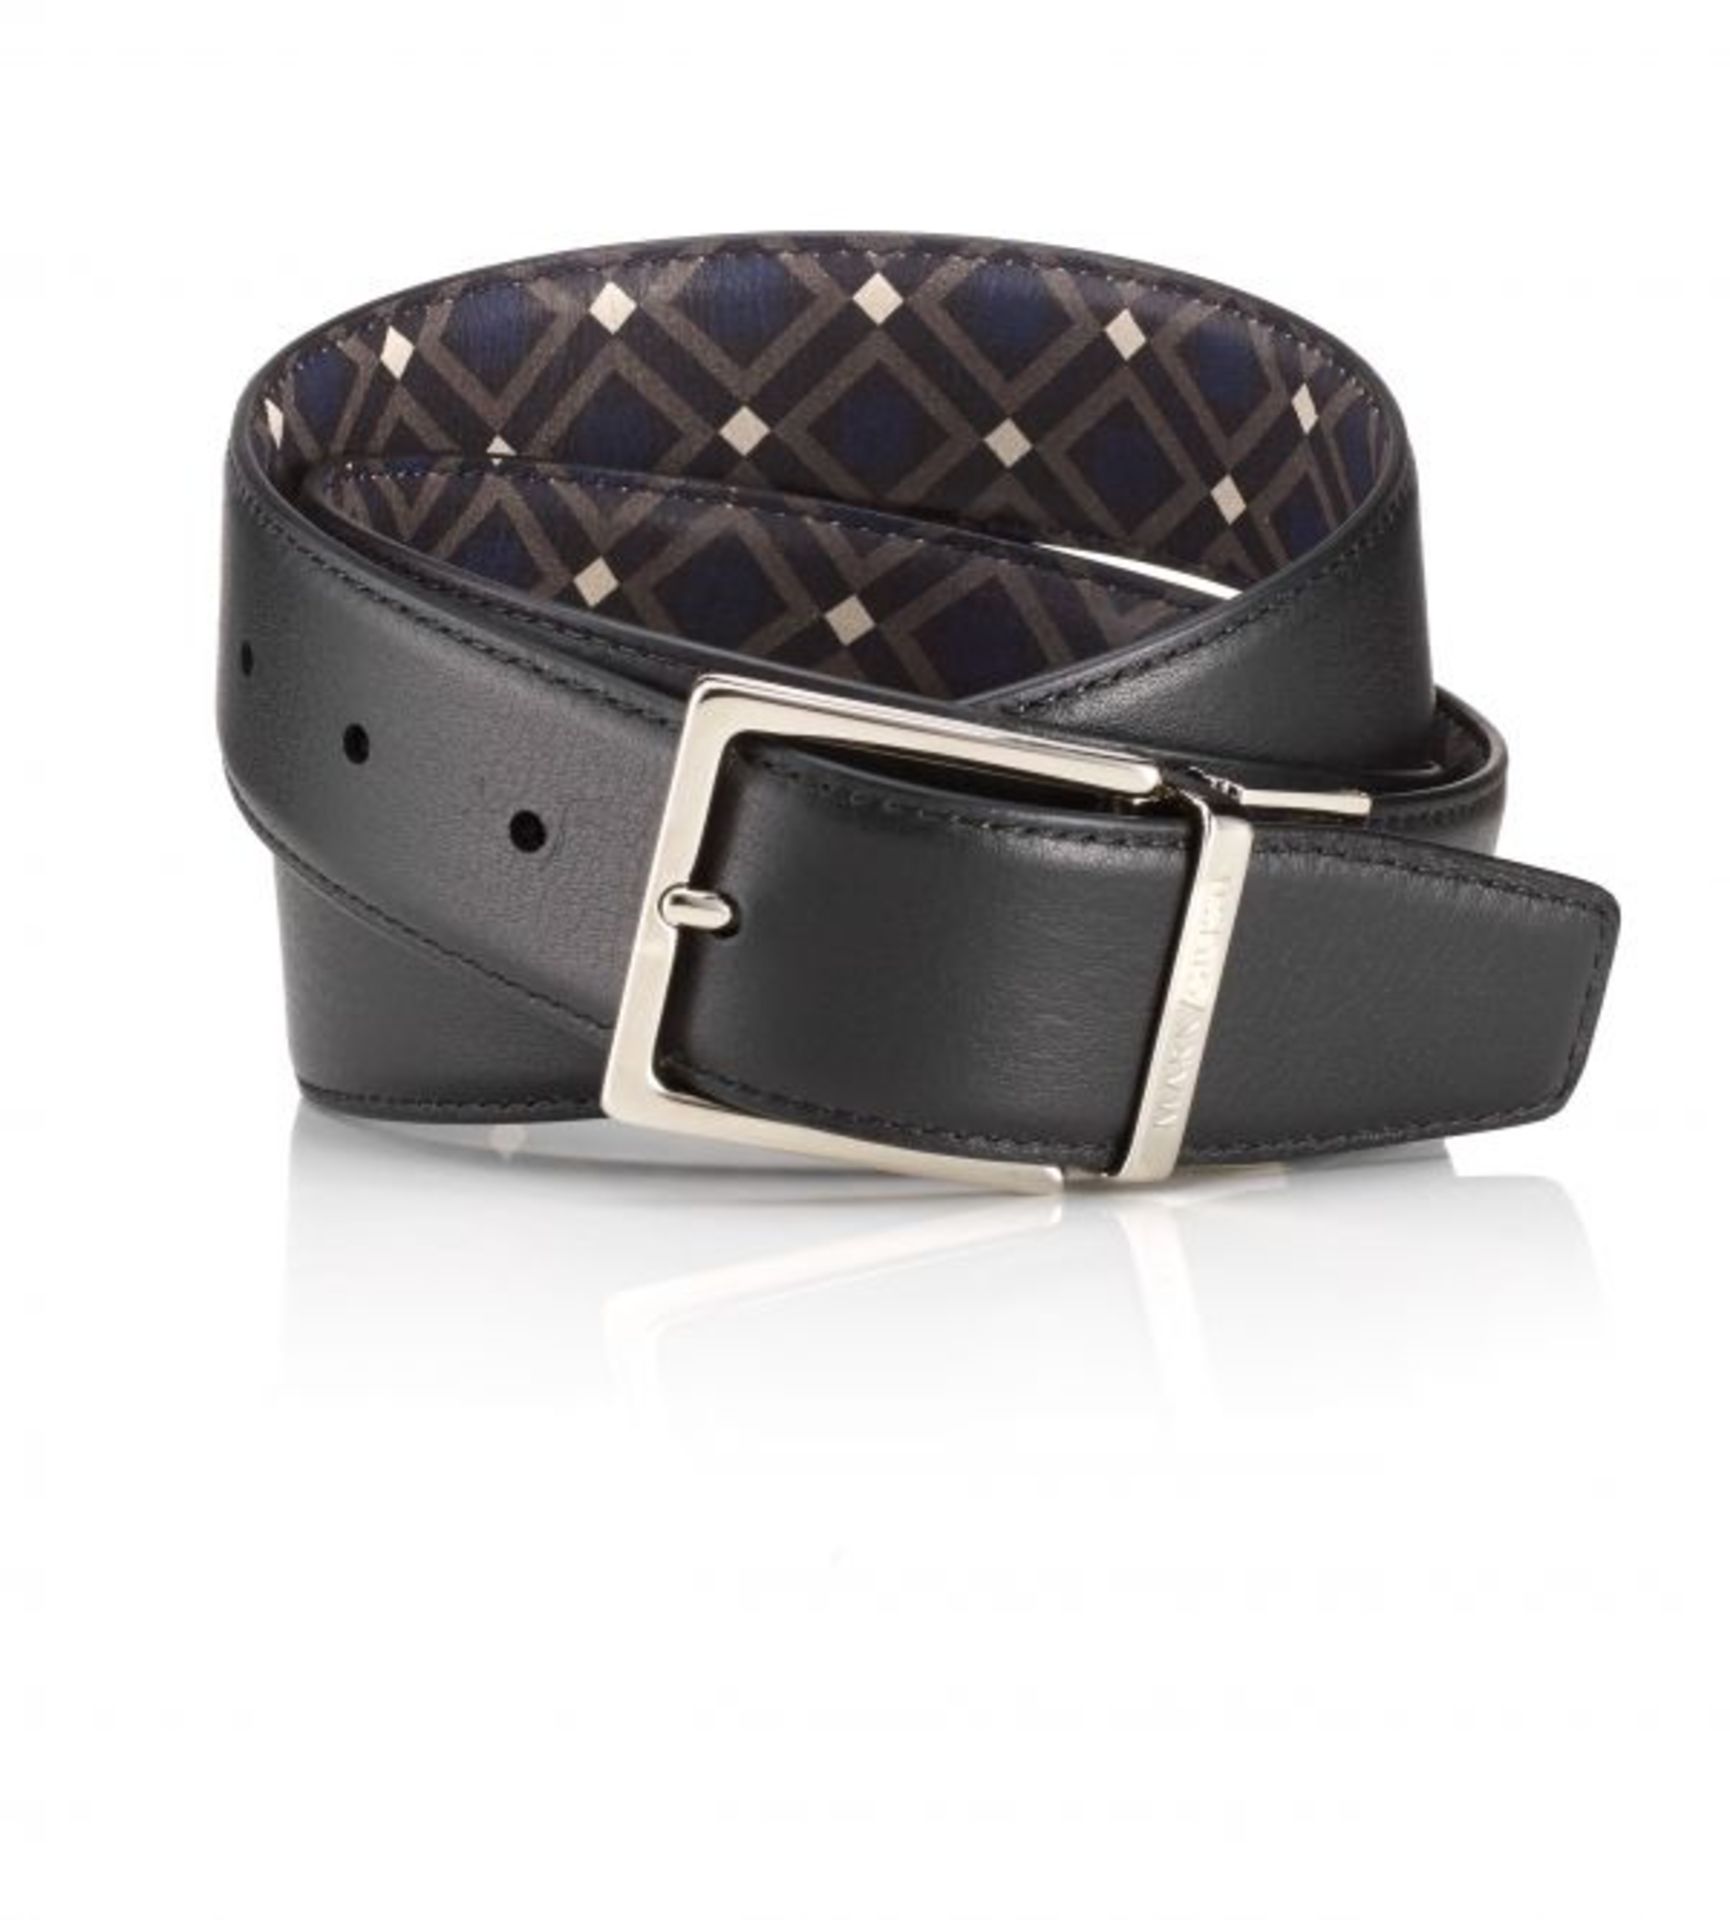 SCUOLA DOUBLE SIDED BELT DOUBLE SIDED BELT Venice Black RRP £145.00 With the reversible belt whether